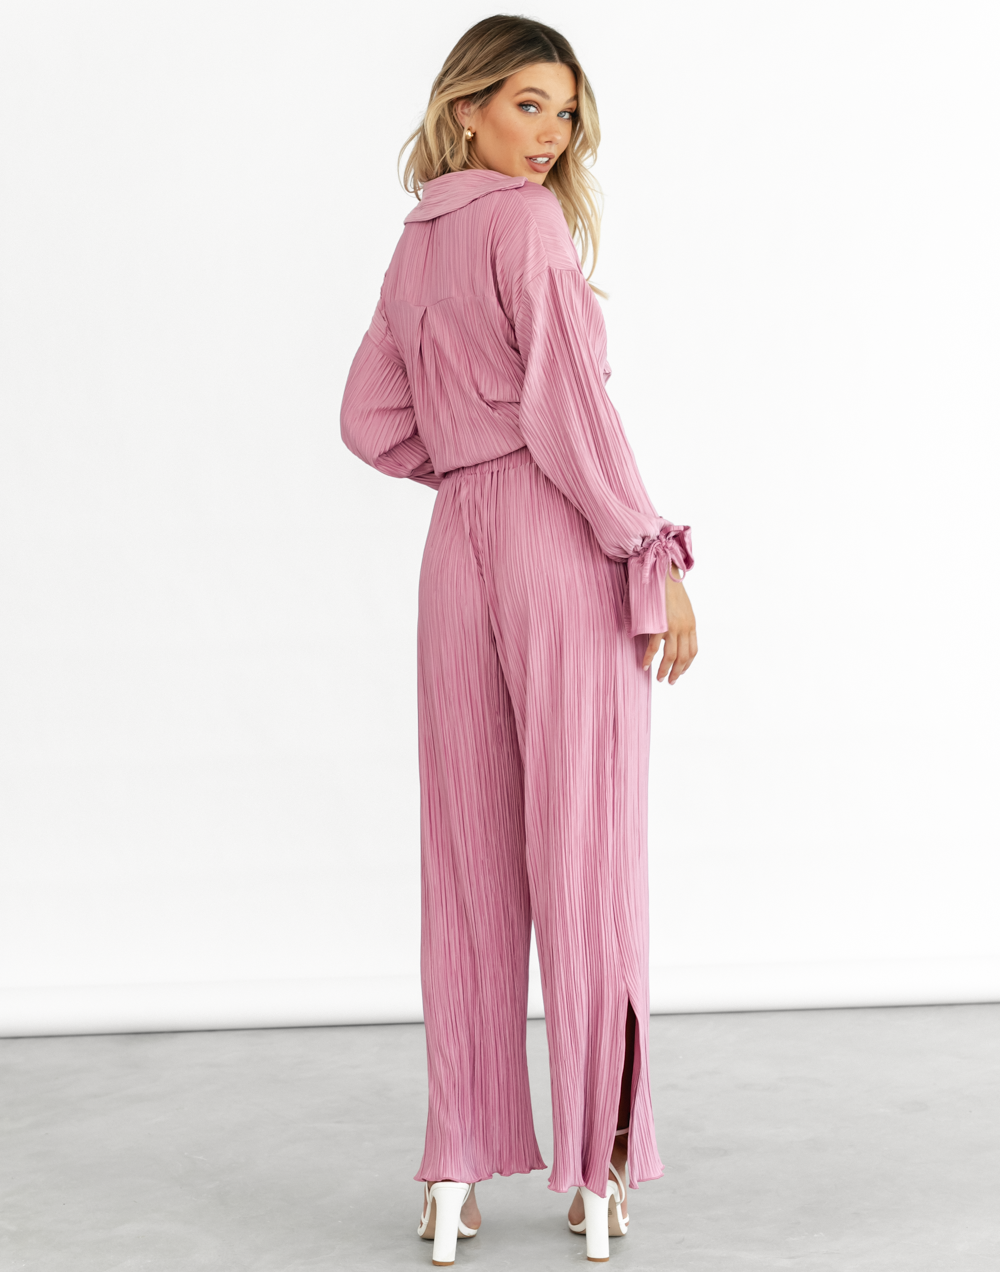 Sweet Serenity Pants (Dusty Pink) - Pink Pleated Pants - Women's Pants - Charcoal Clothing